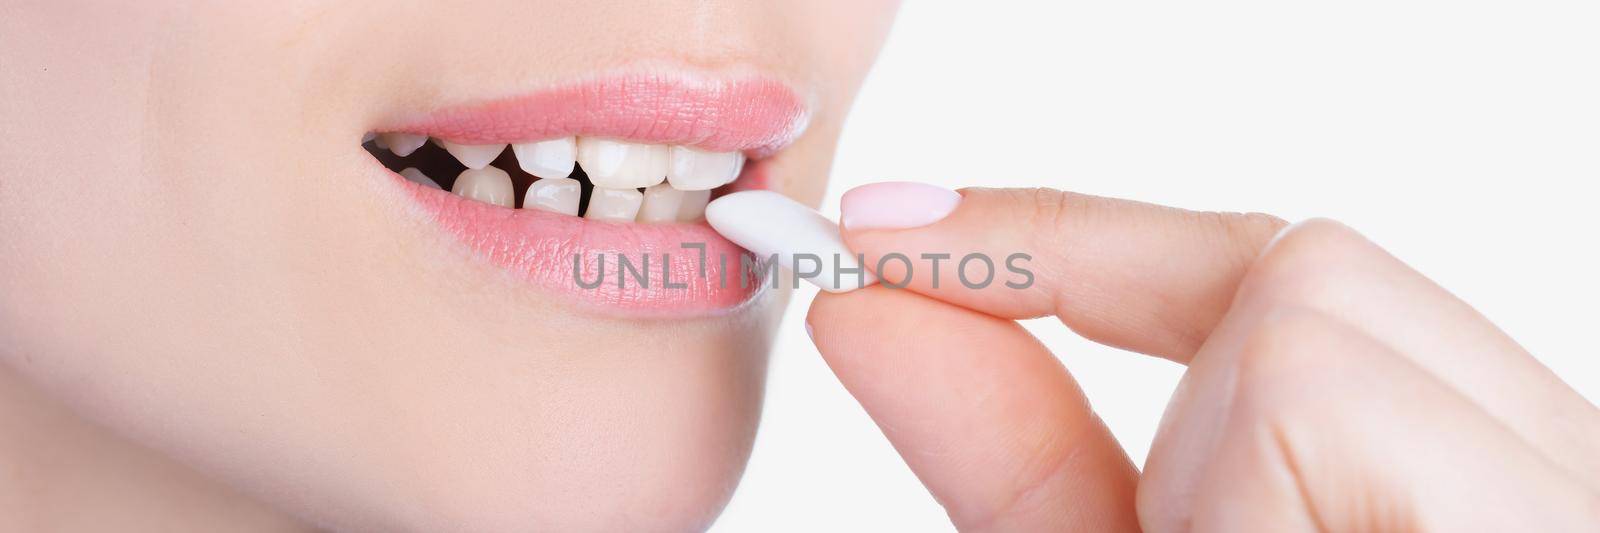 Close-up of womans face and female hand putting into mouth chewing gum. Lady enjoying sweet gum for fresh breath. Teethcare, health, dentistry concept